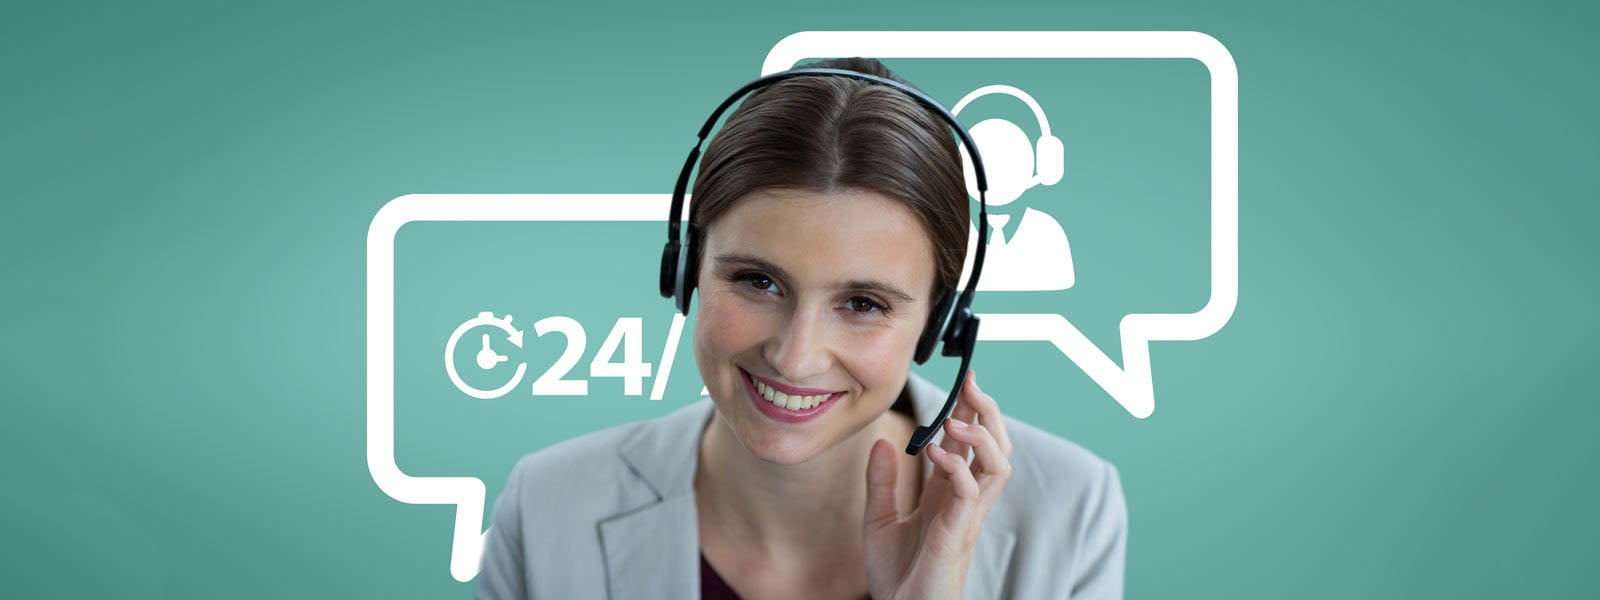 A Complete Guide to 24x7 Customer Service for Your Business